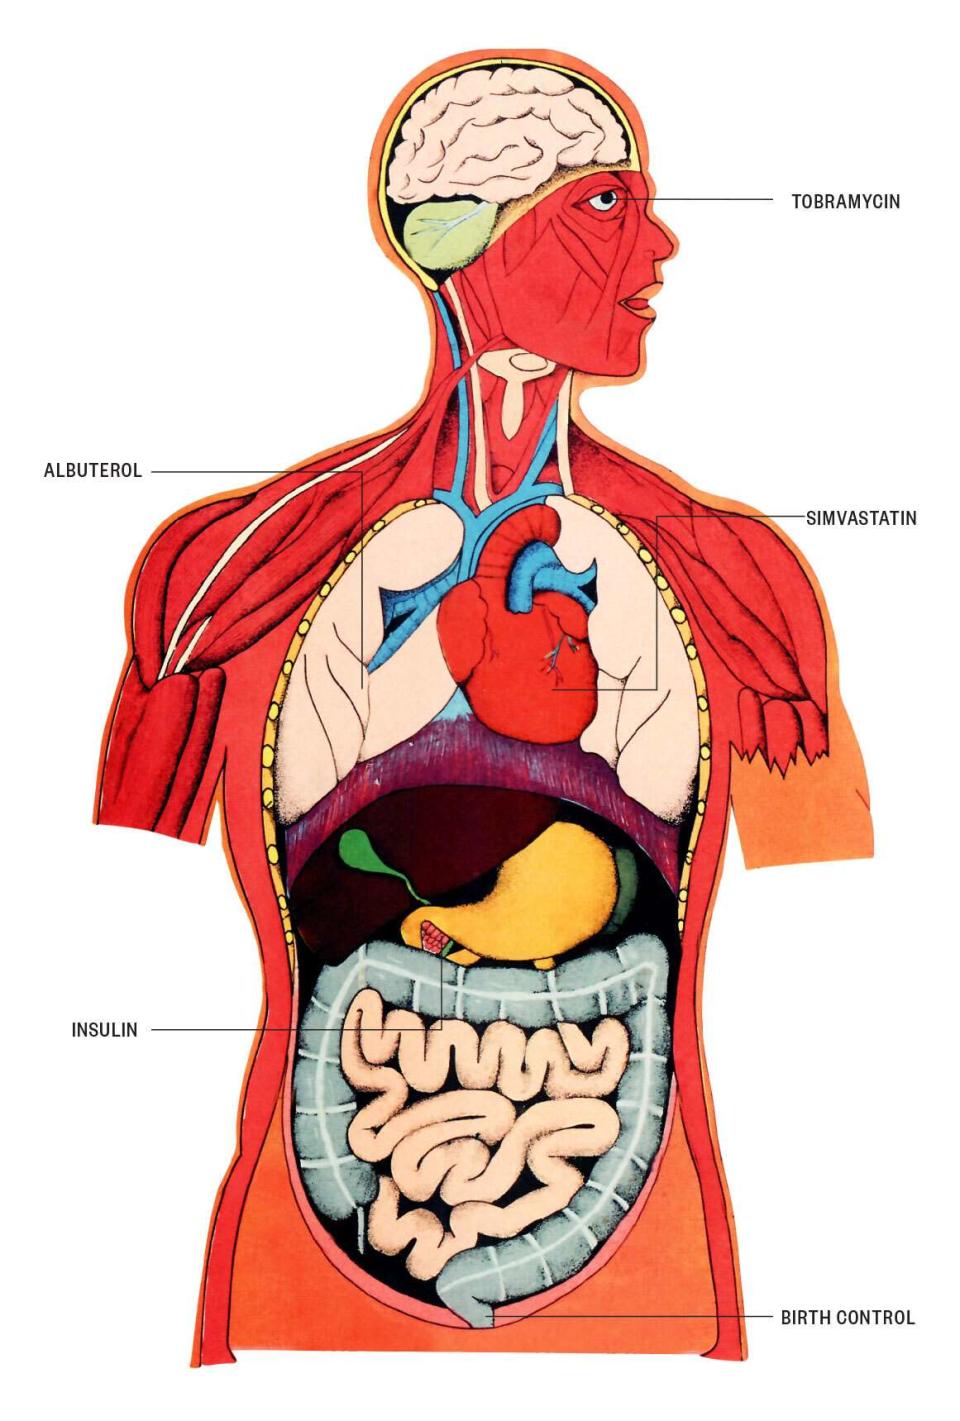 Graphic of the anatomy of the top half of the human body, identifying which parts of the body certain drugs affect.